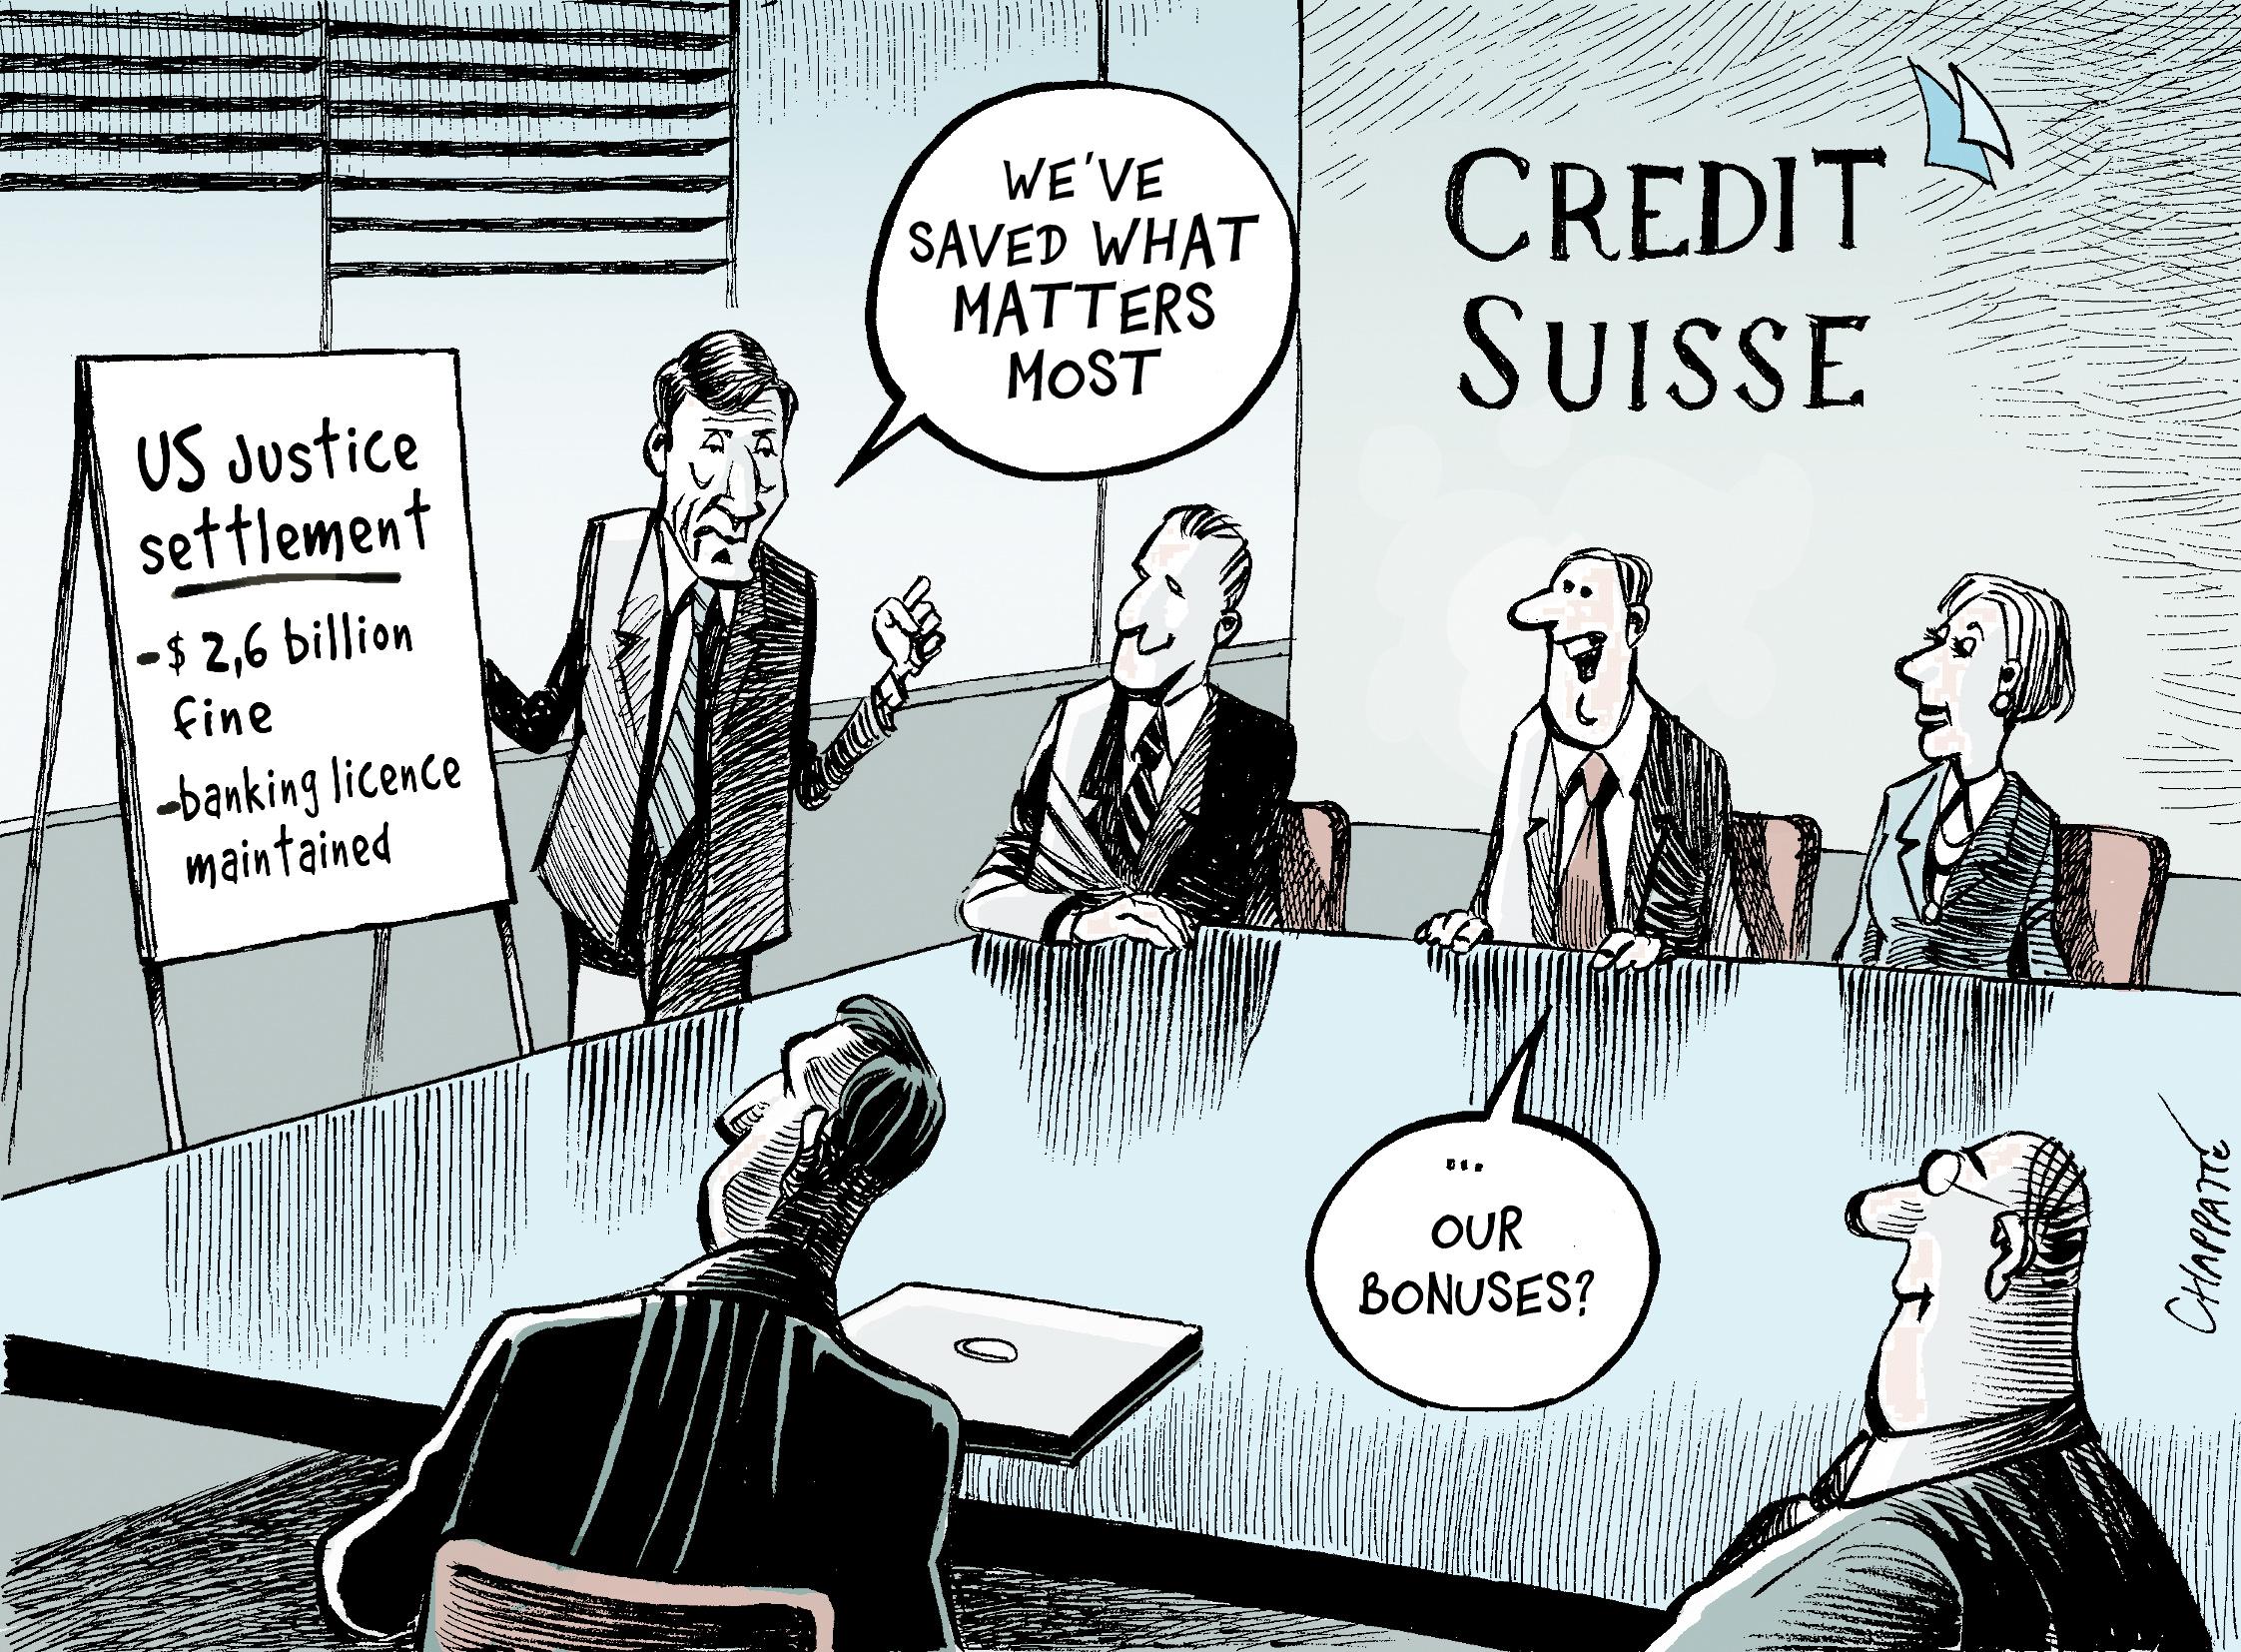 Credit Suisse off the hook